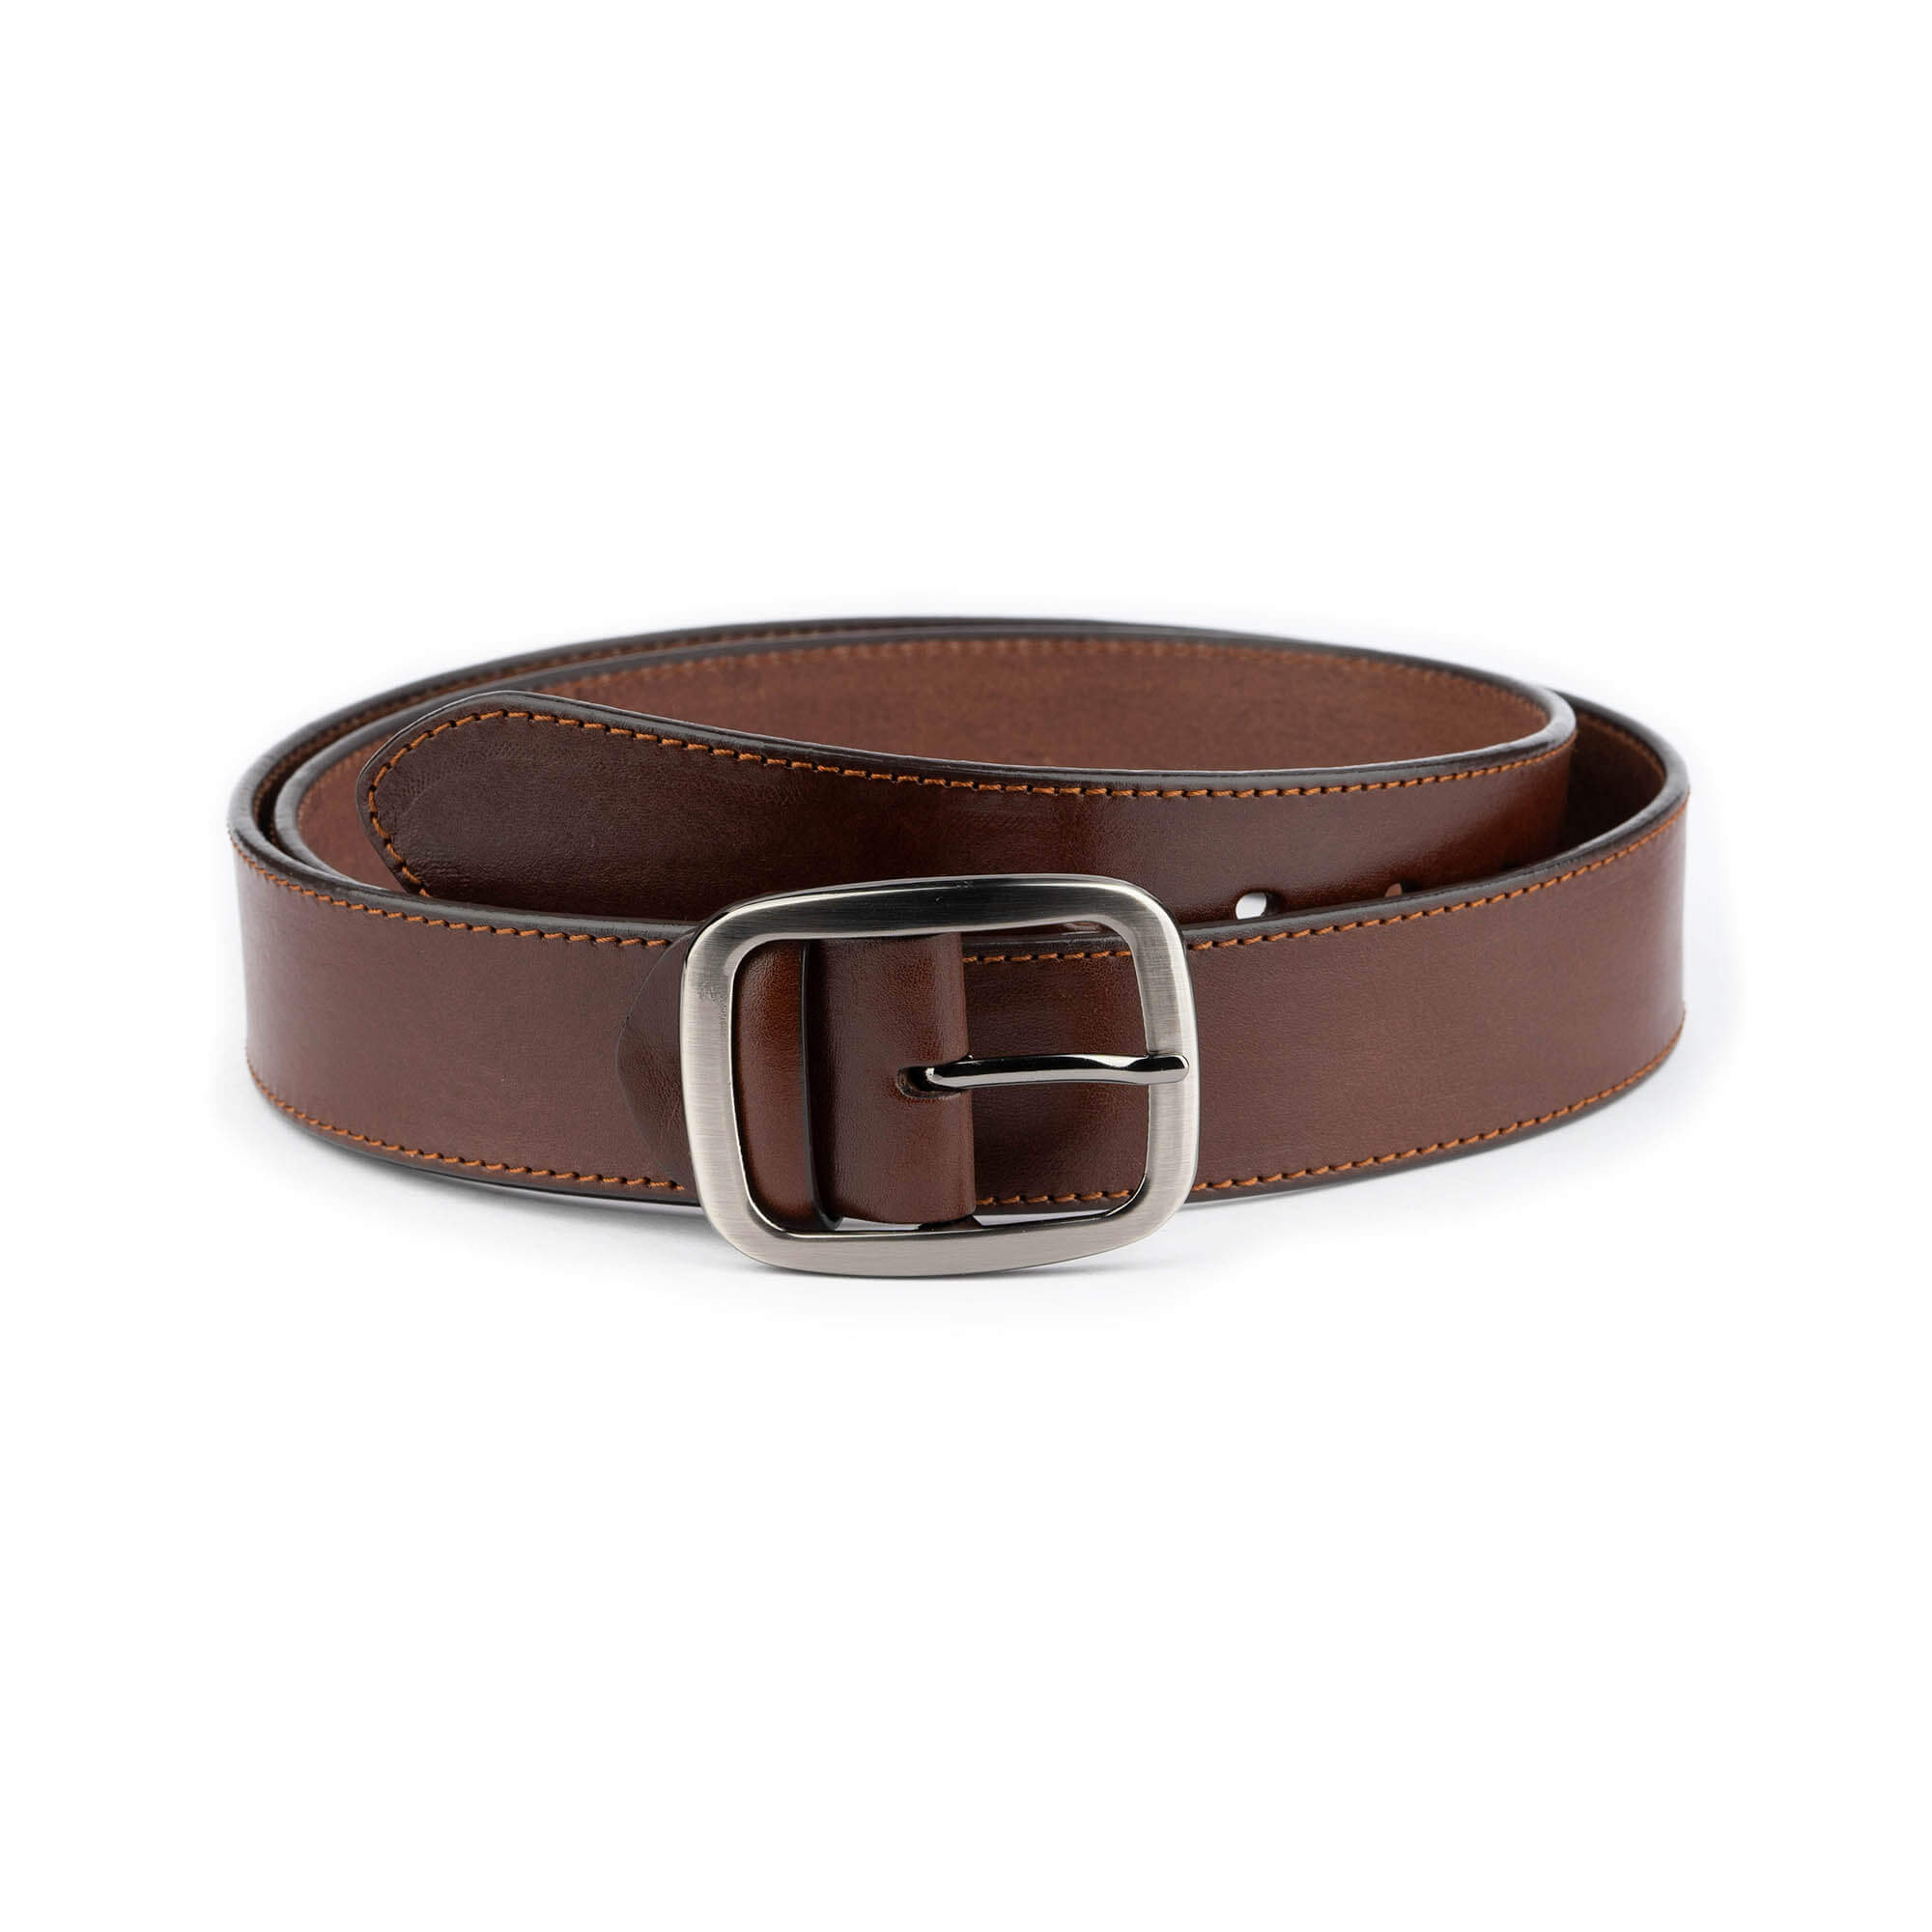 Buy Thick Womens Belt For Jeans 4.0 Cm Brown Real Leather